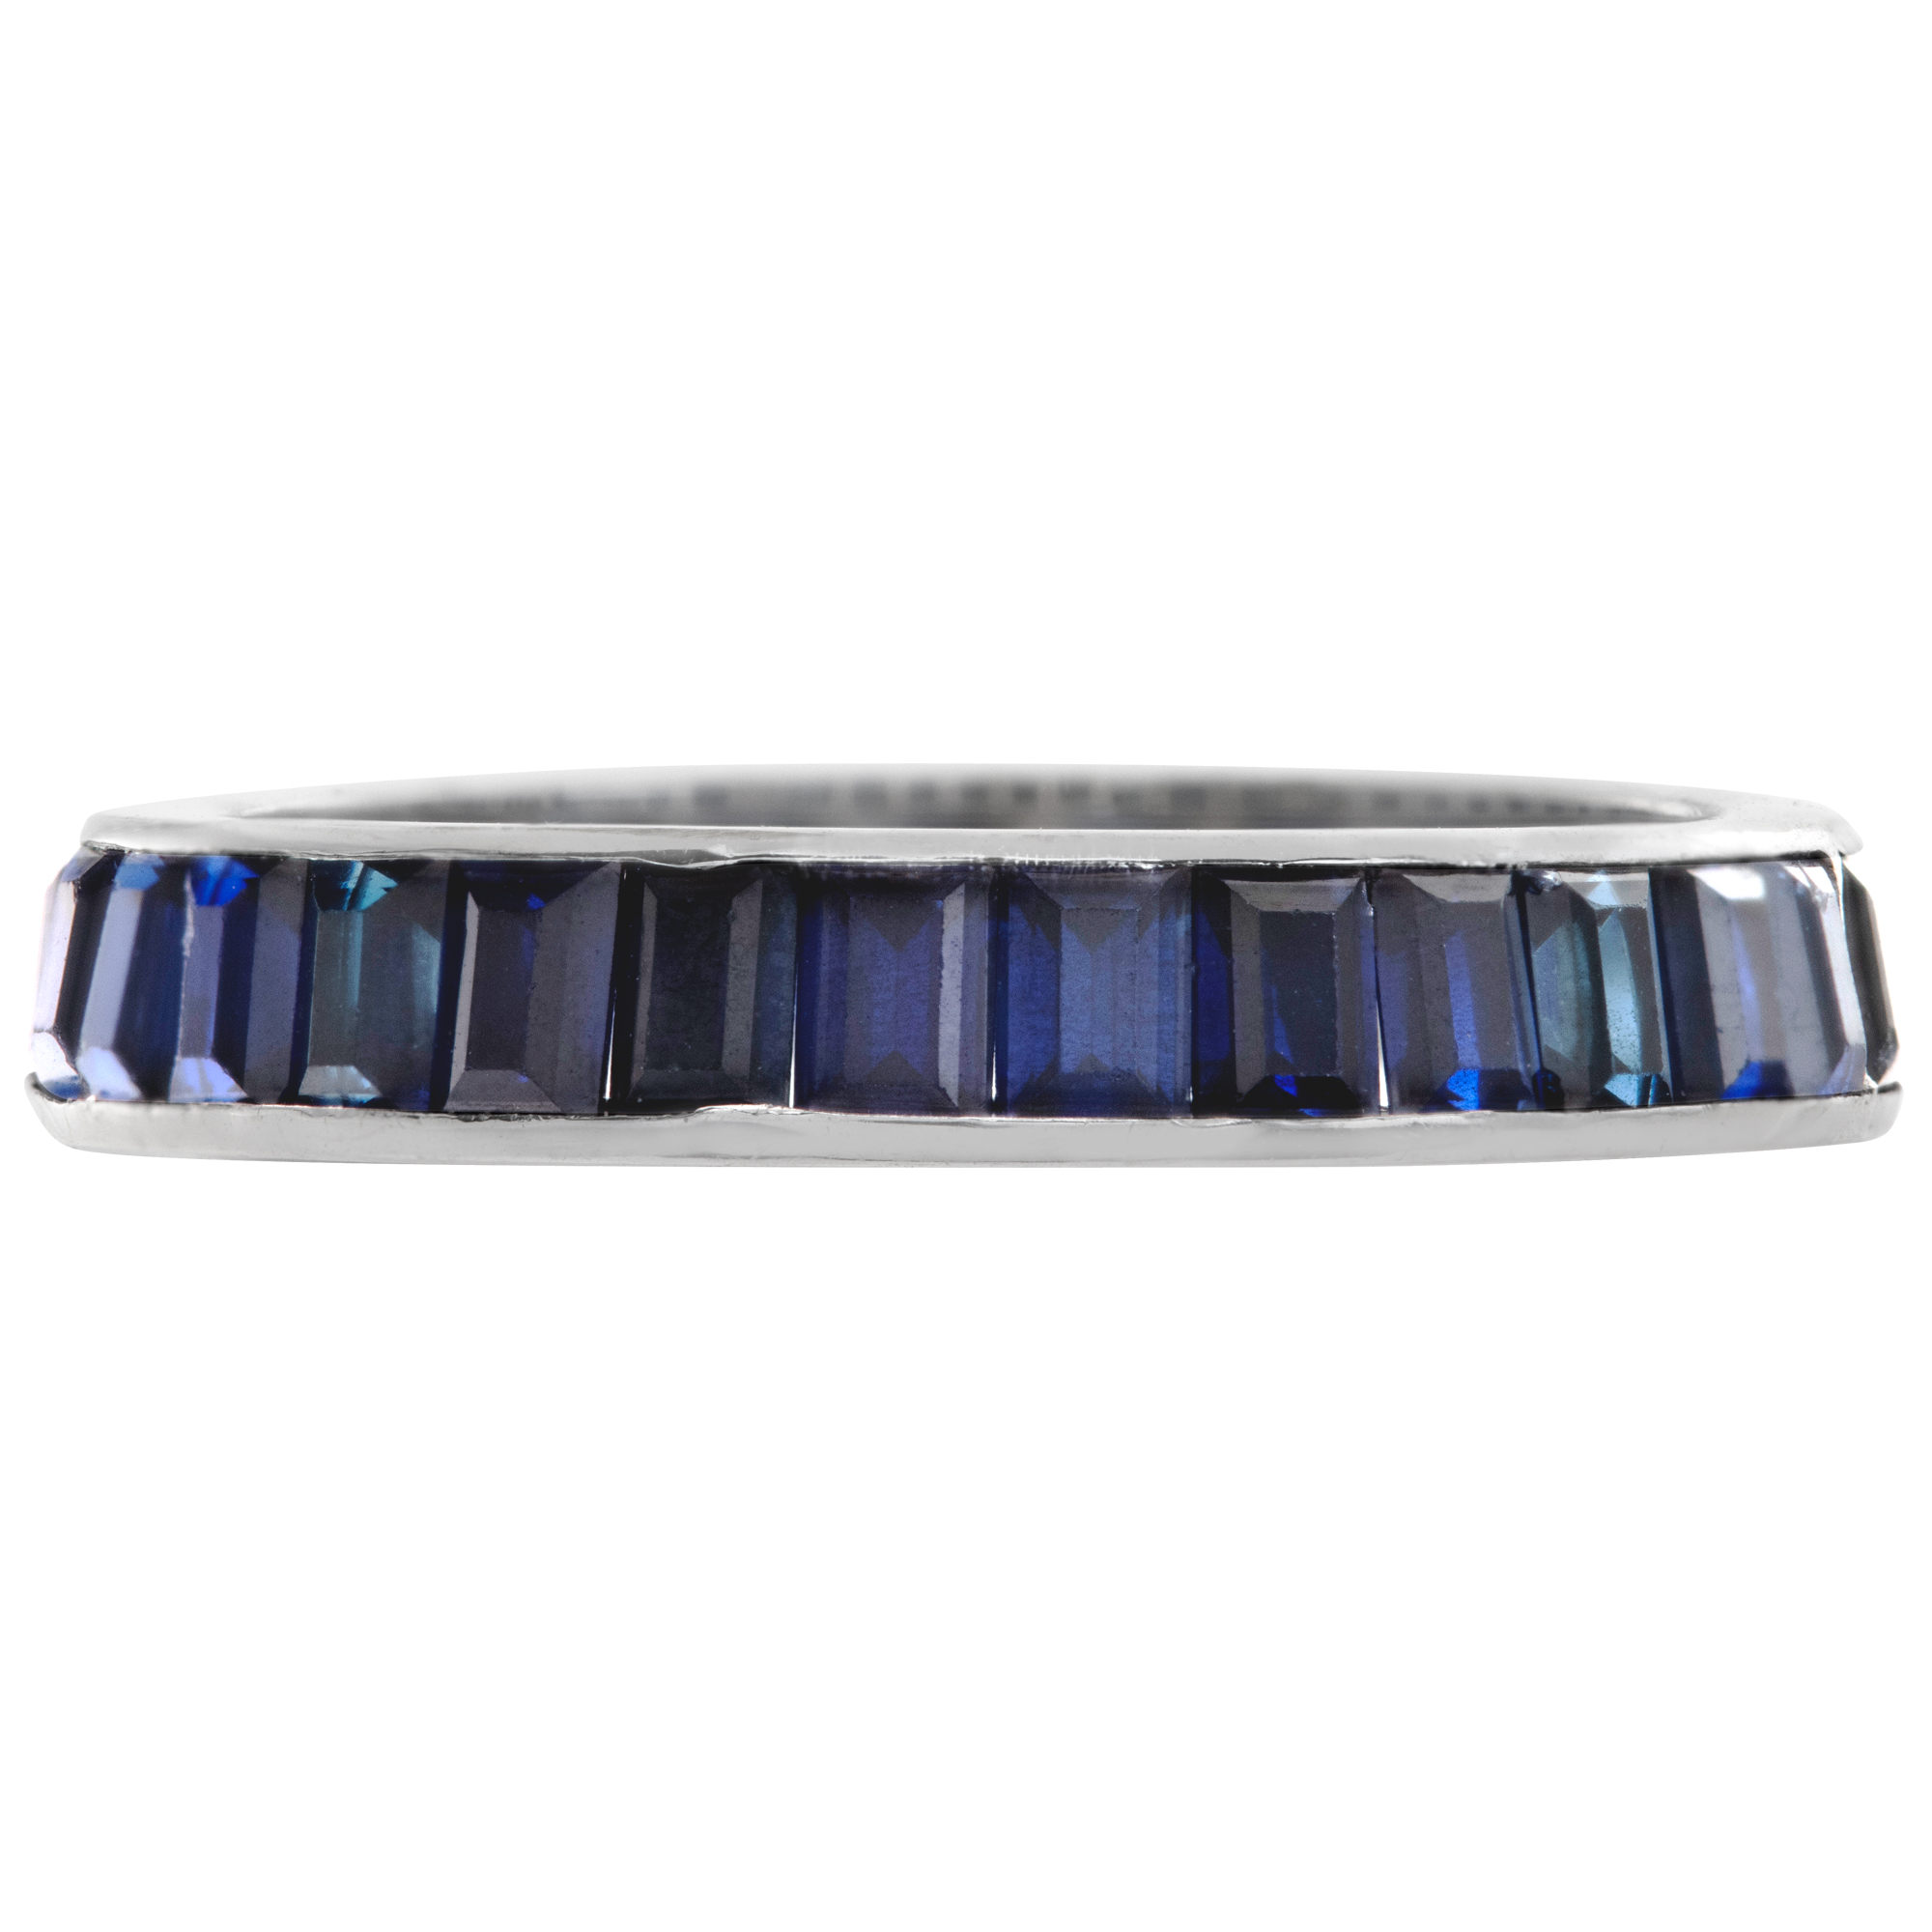 Sapphire eternity band in 14k white gold. Rectangular step cut sapphire total approx. 1.50 carat. Size 7.